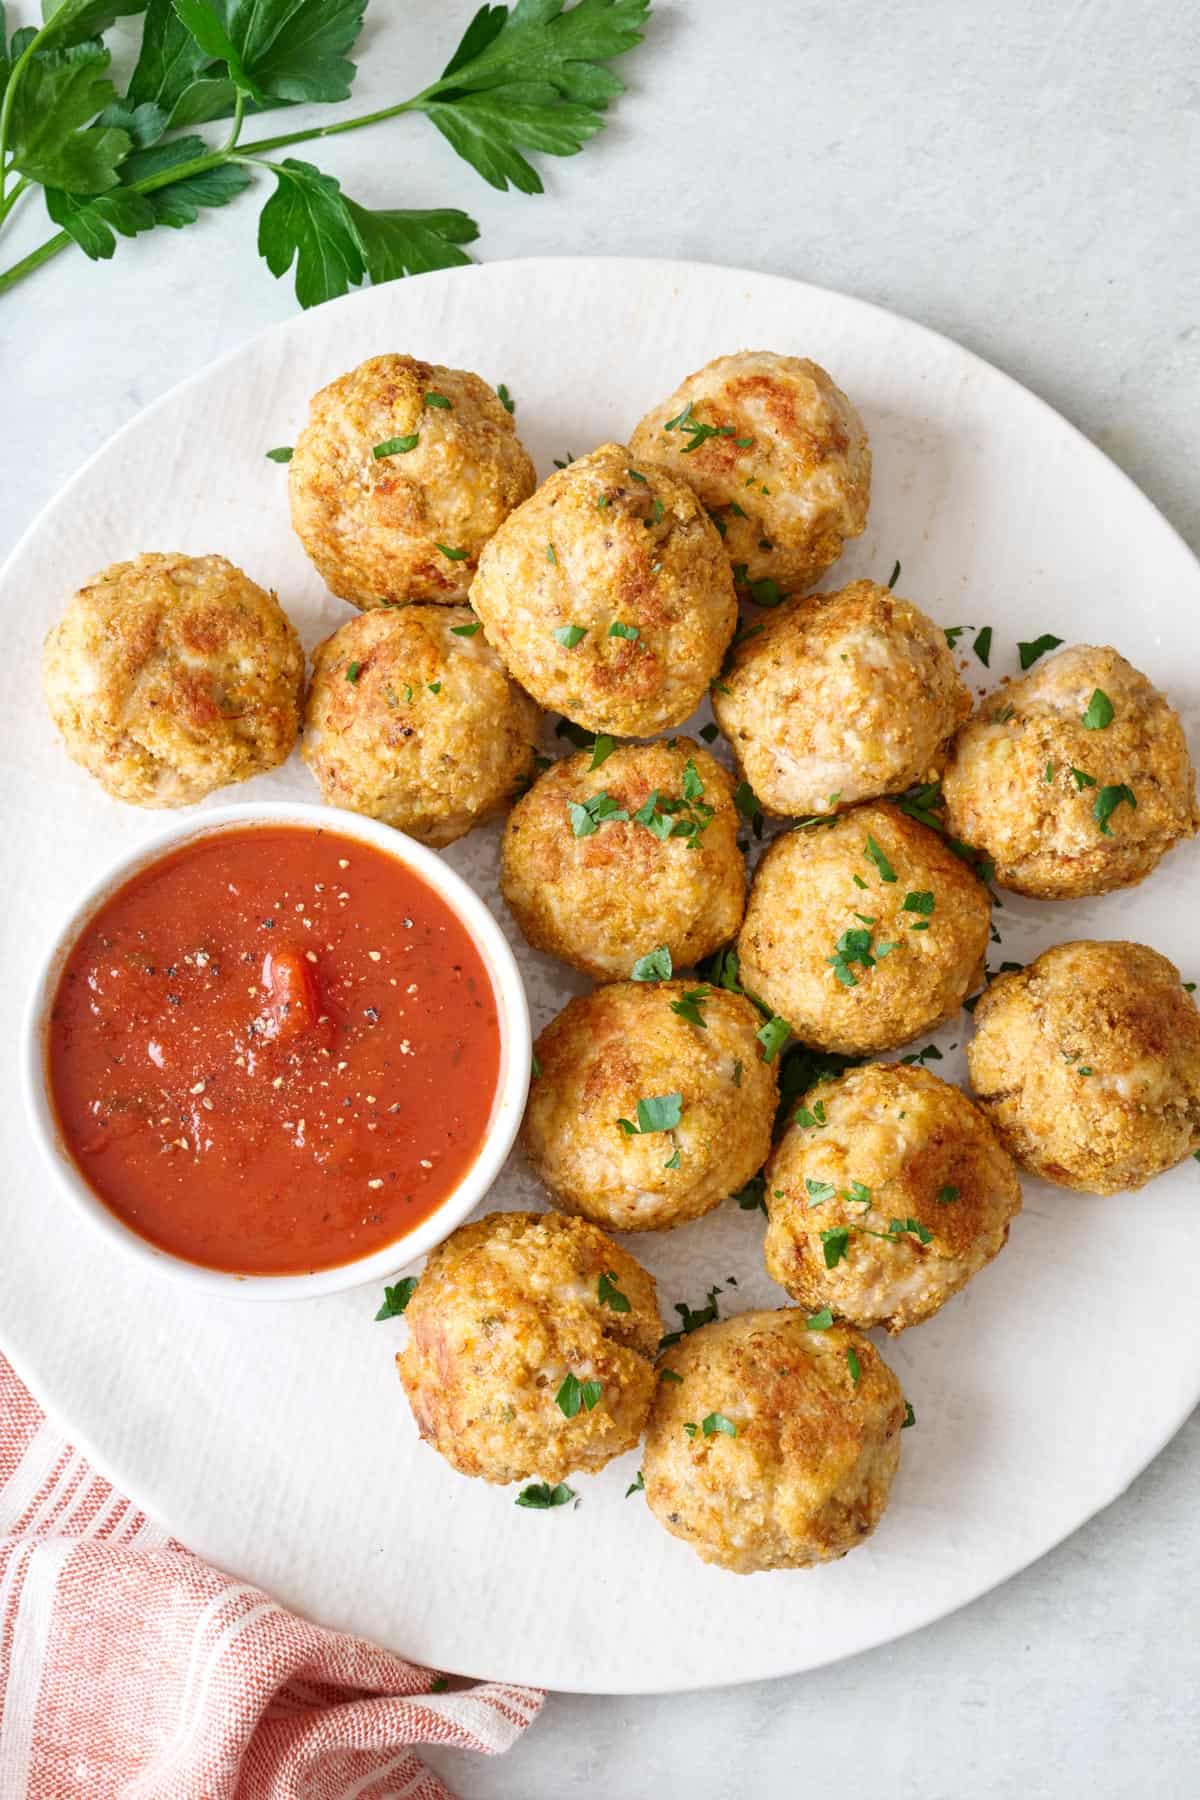 Plate of parmesan baked chicken meatballs with a side of marinara sauce for dipping.